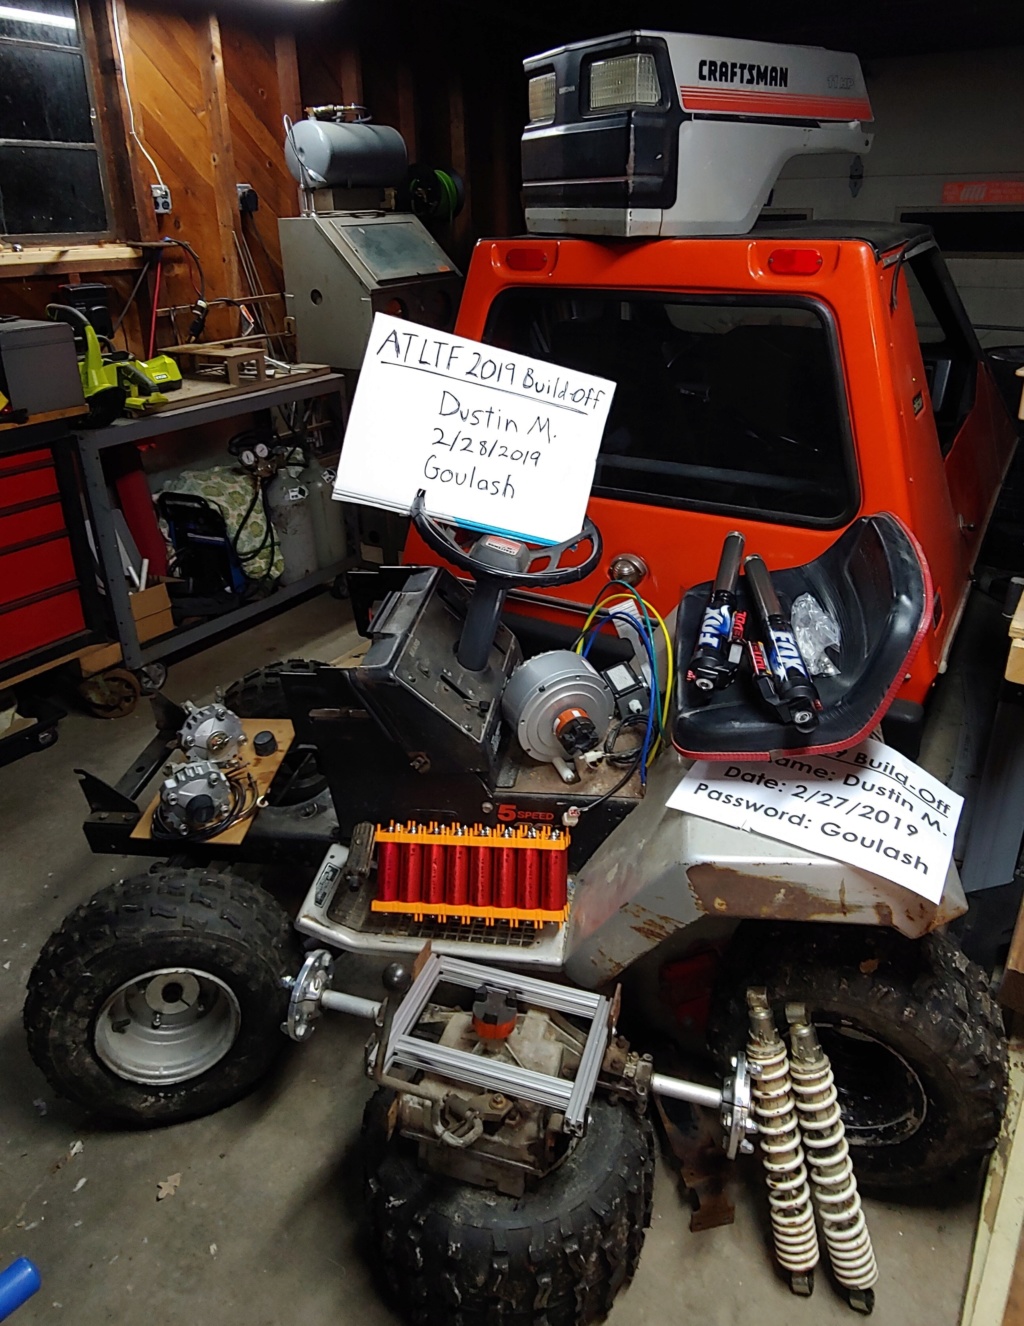 Dustin M's Wood-ED (Craftsman Electric Drive Woods Tractor) [2019 Build-Off Entry] 20190212